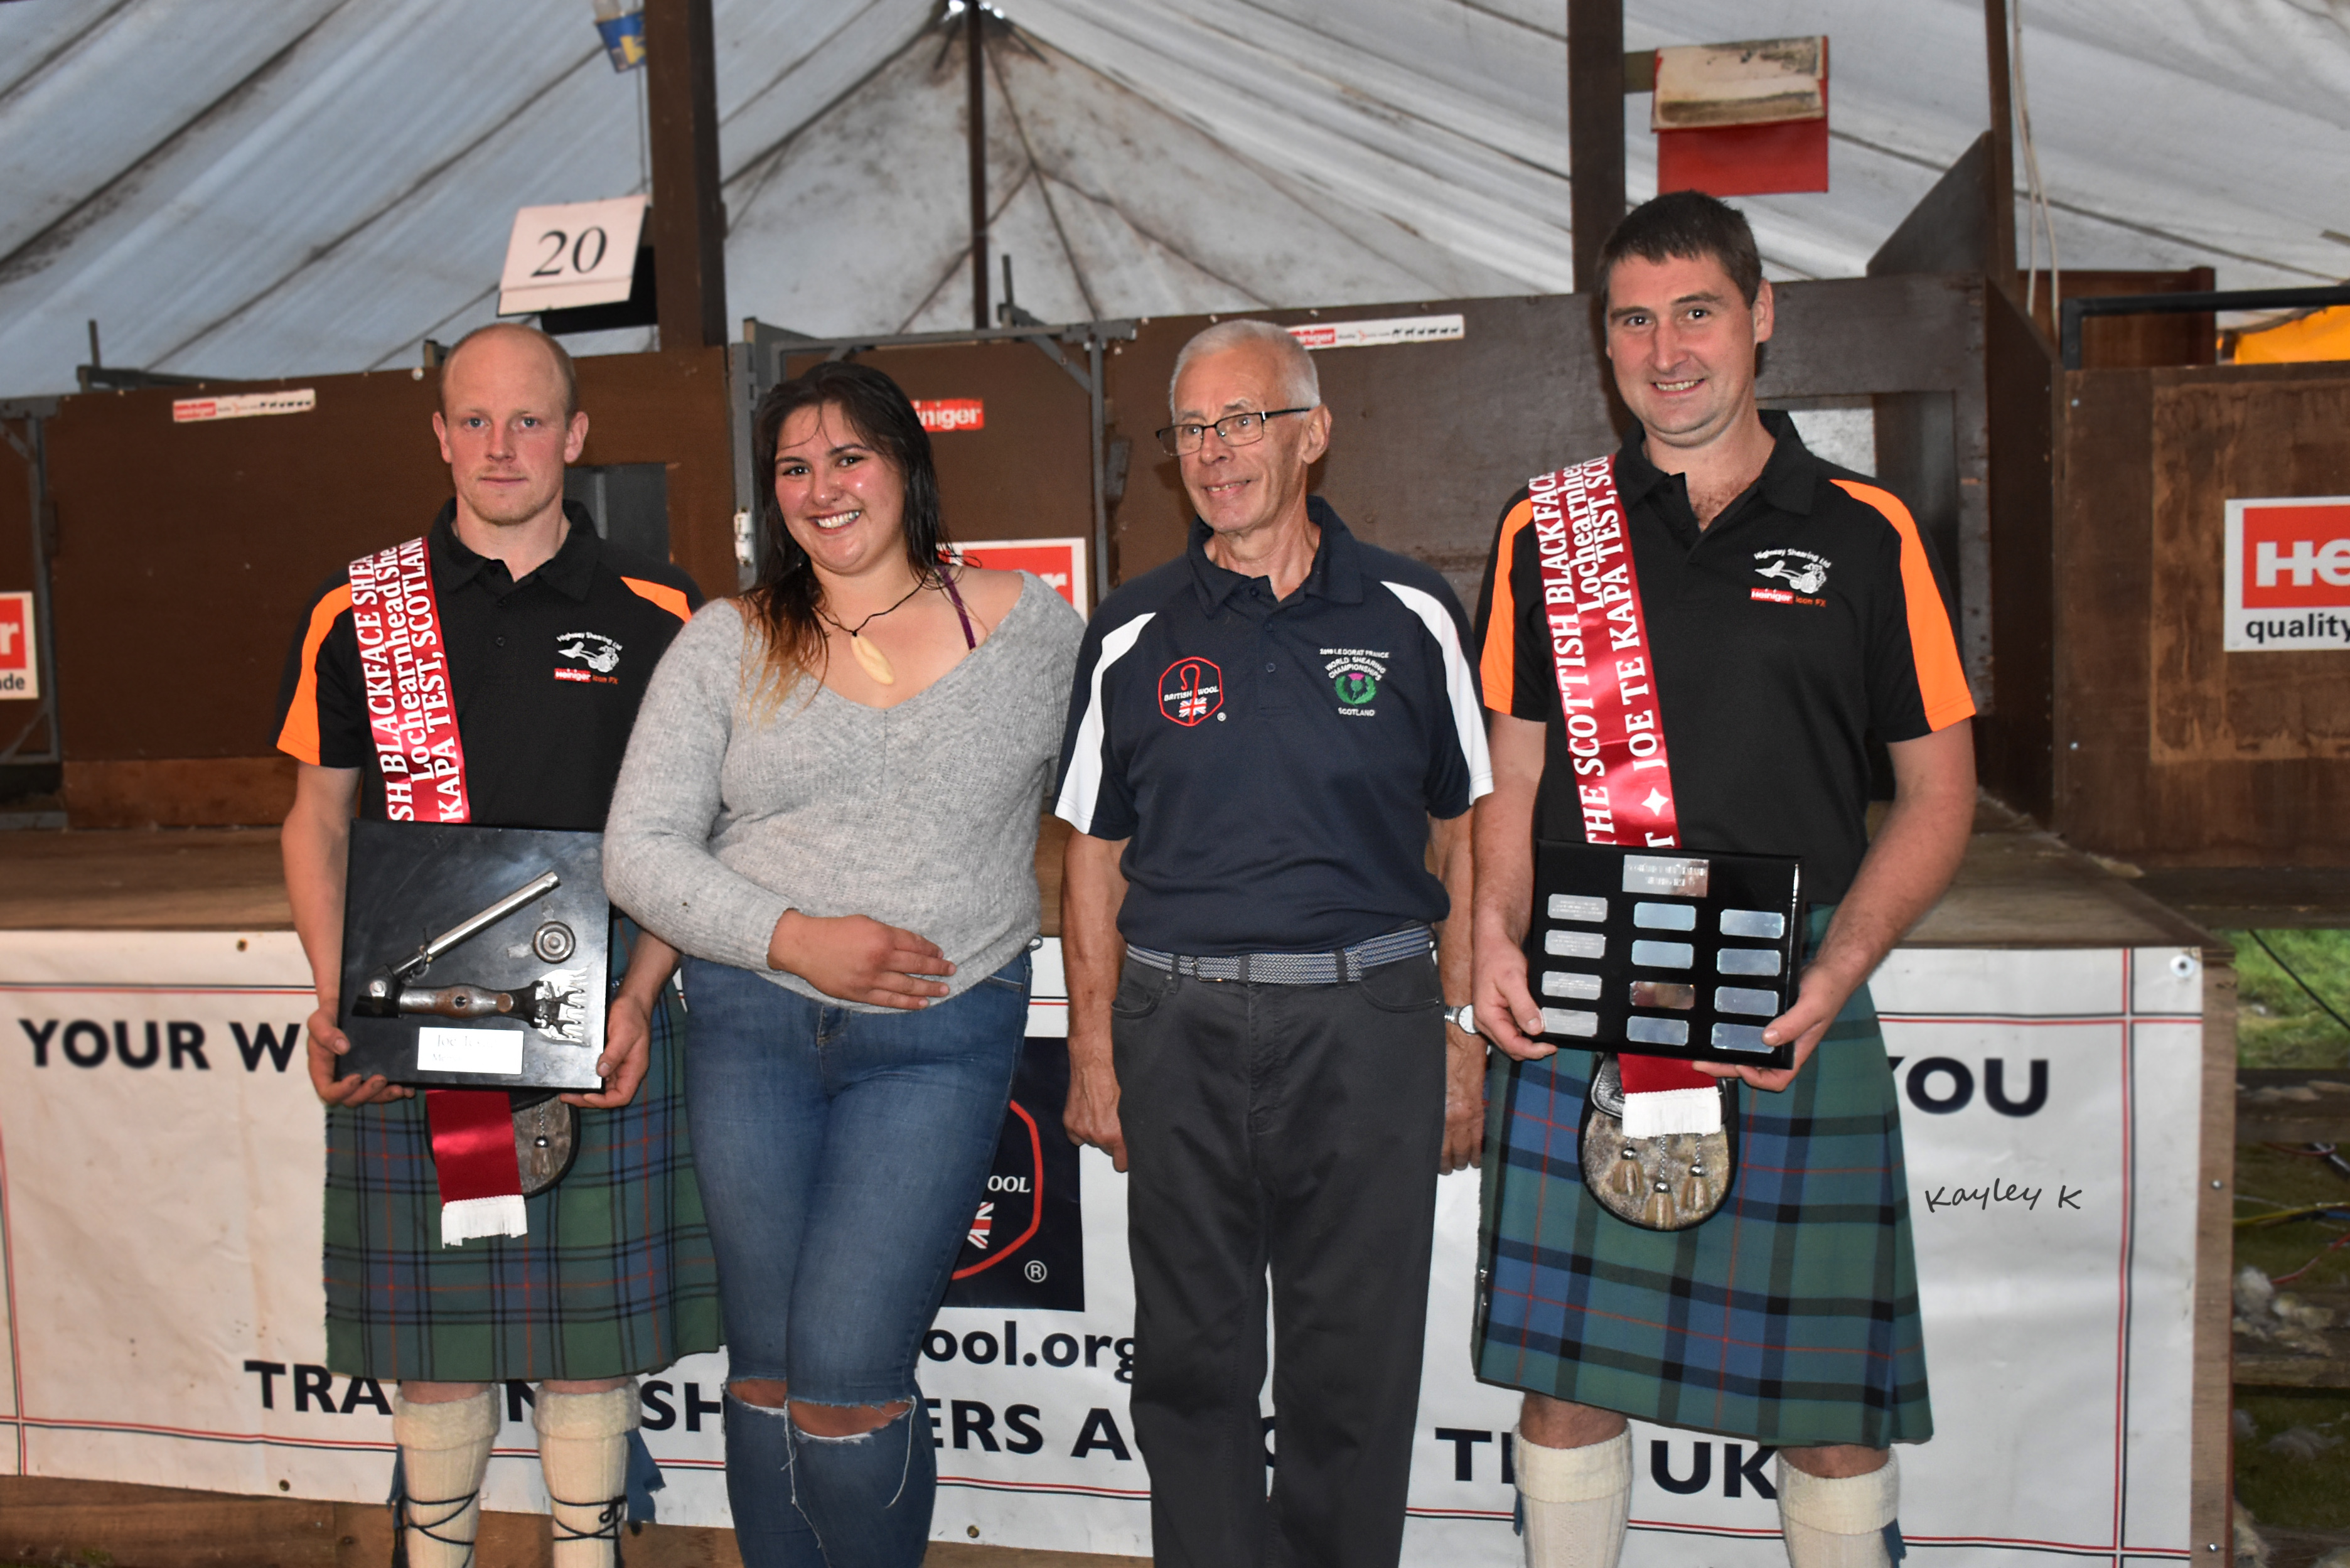 The triumphant Scottish shearing team  at the Lochearnhead event.